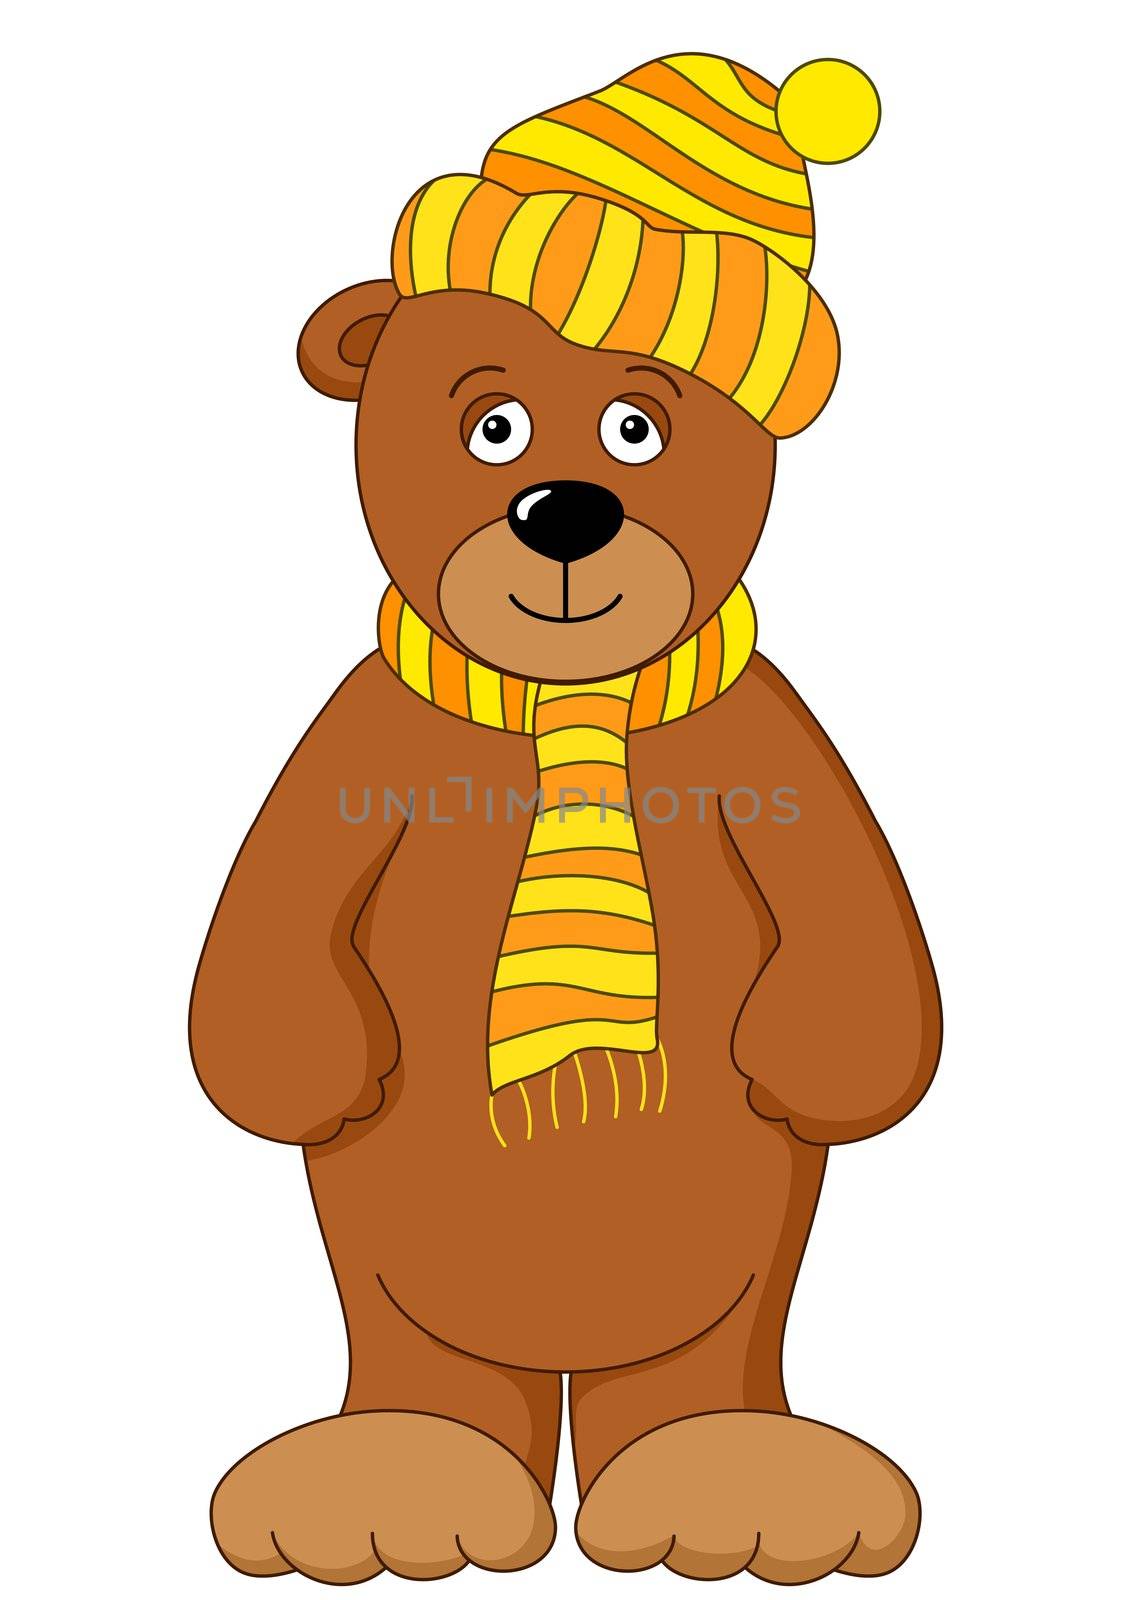 Toy Teddy bear in cap and scarf